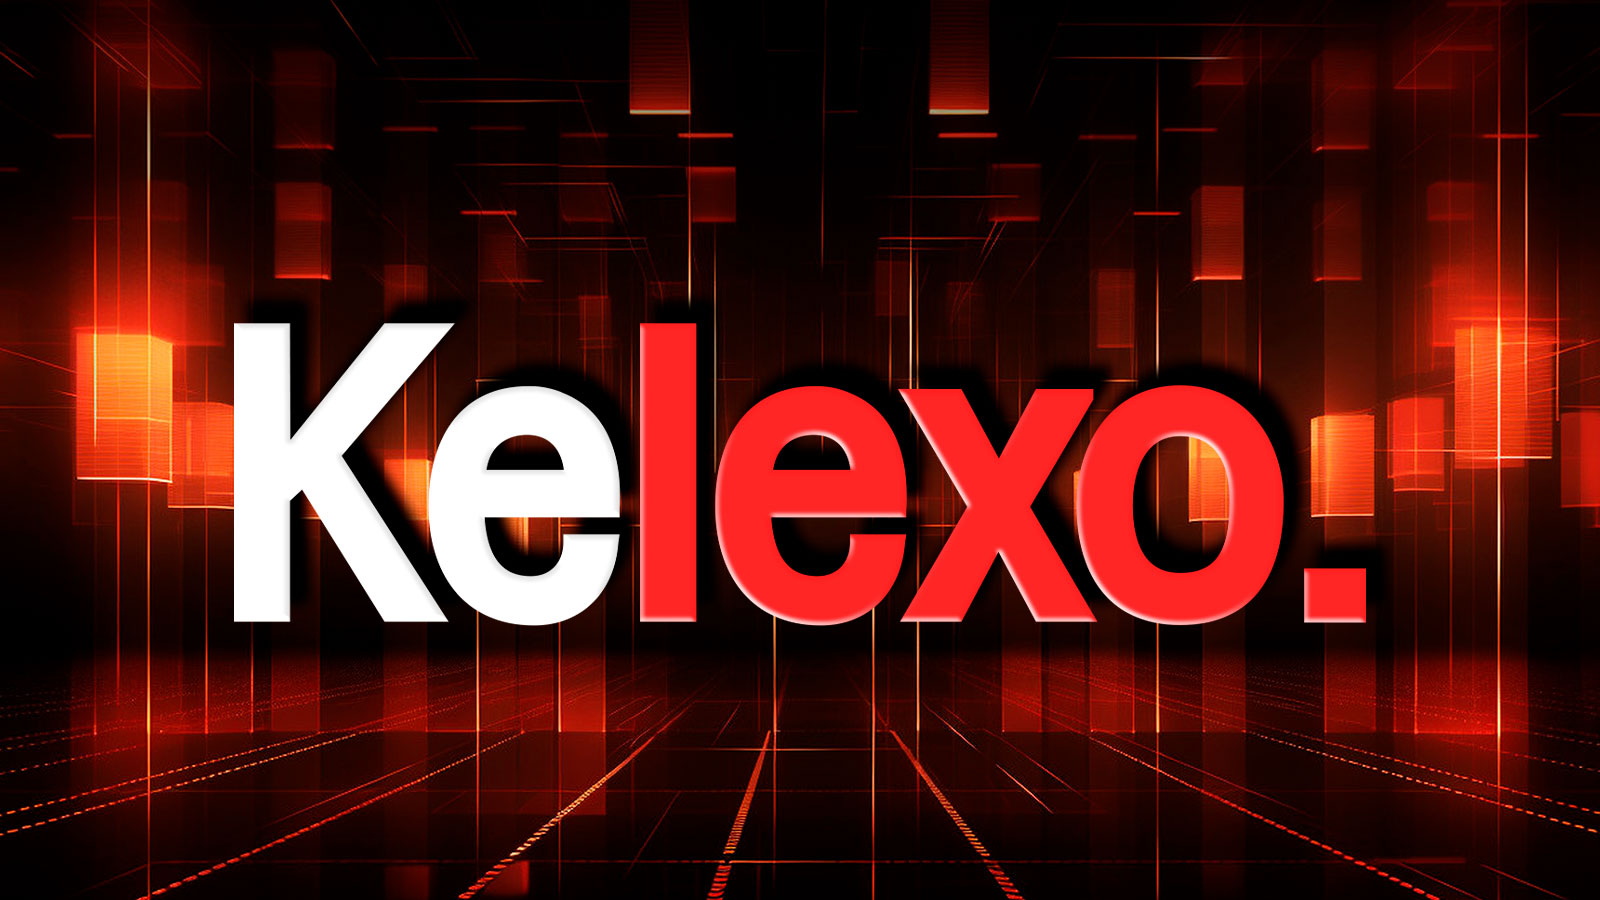 Kelexo (KLXO) Pre-Sale Might be Highlighted for Altcoiners in April as Polkadot (DOT), Cardano (ADA) Top Cryptocurrencies Are Recovering